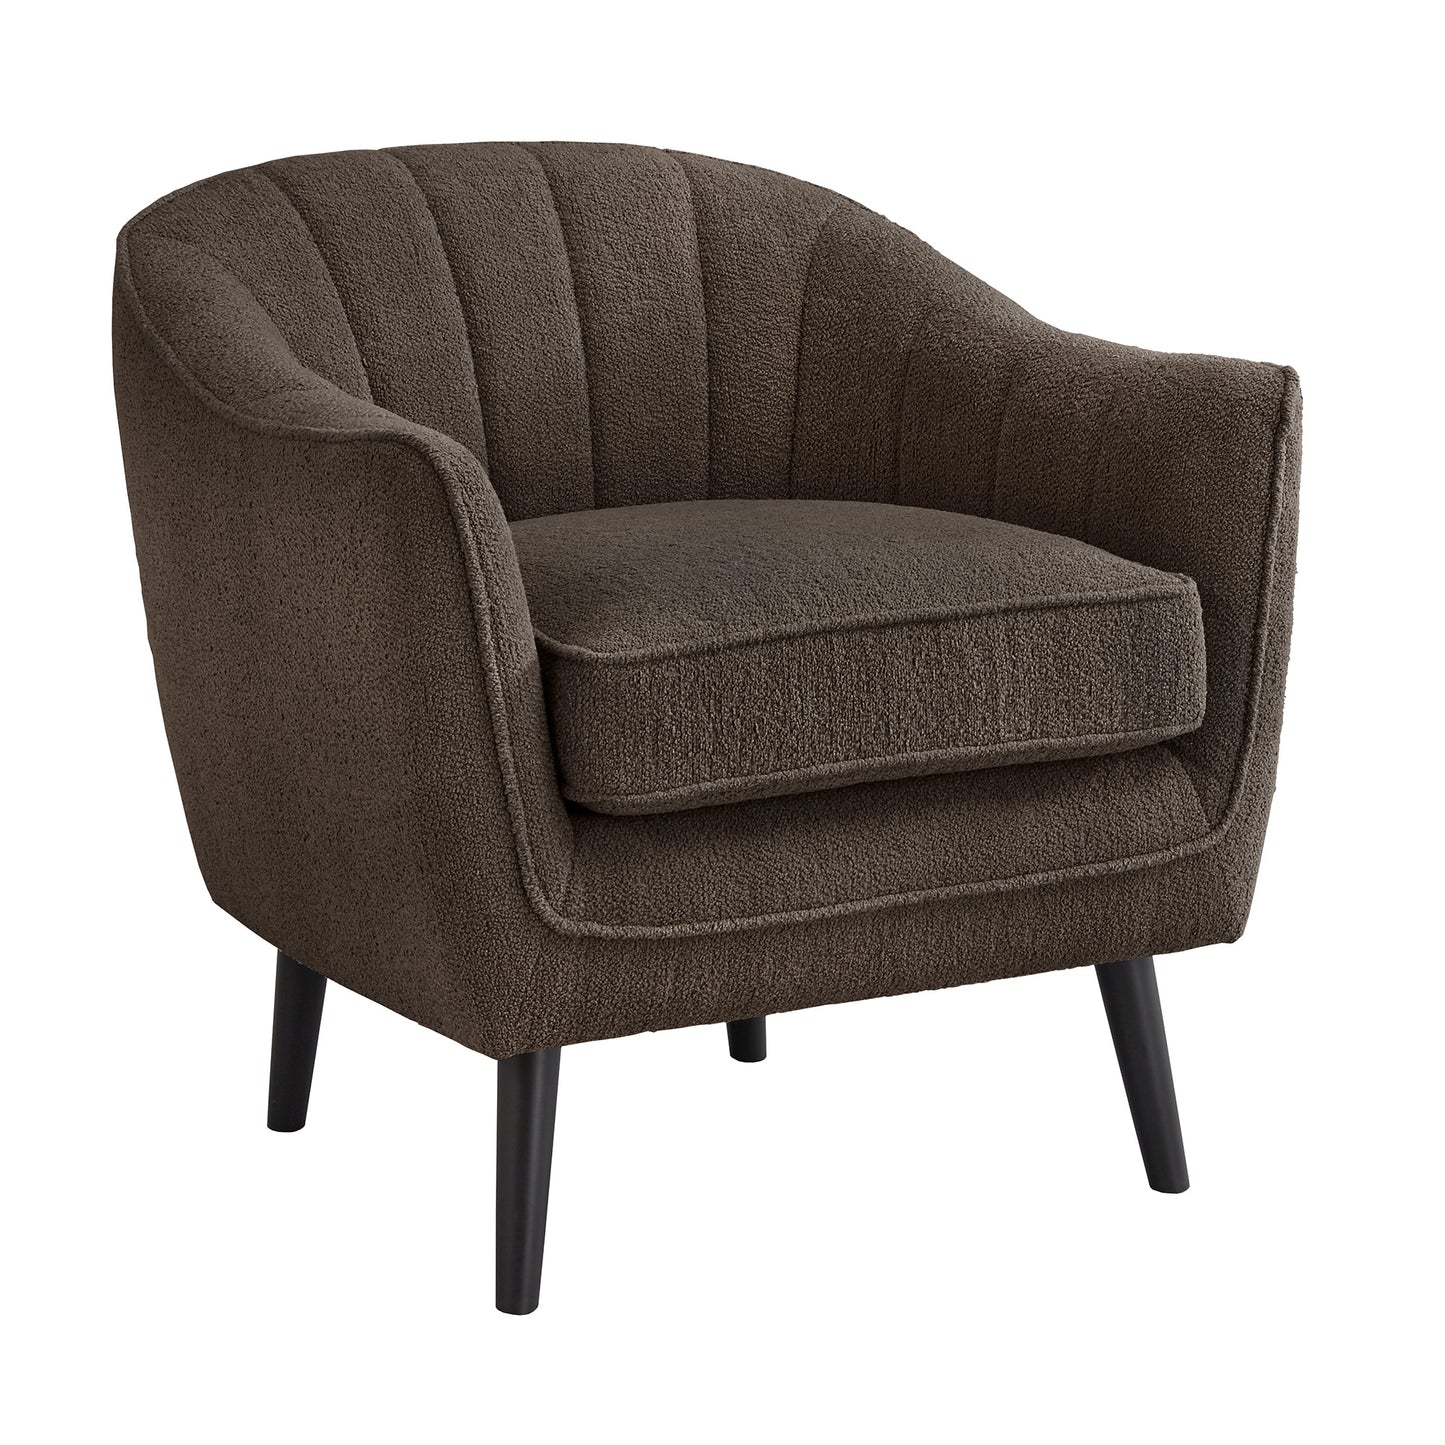 Mid-Century Modern Channel-Tufted Accent Chair with Removable Cushion Cover - Dark Chocolate